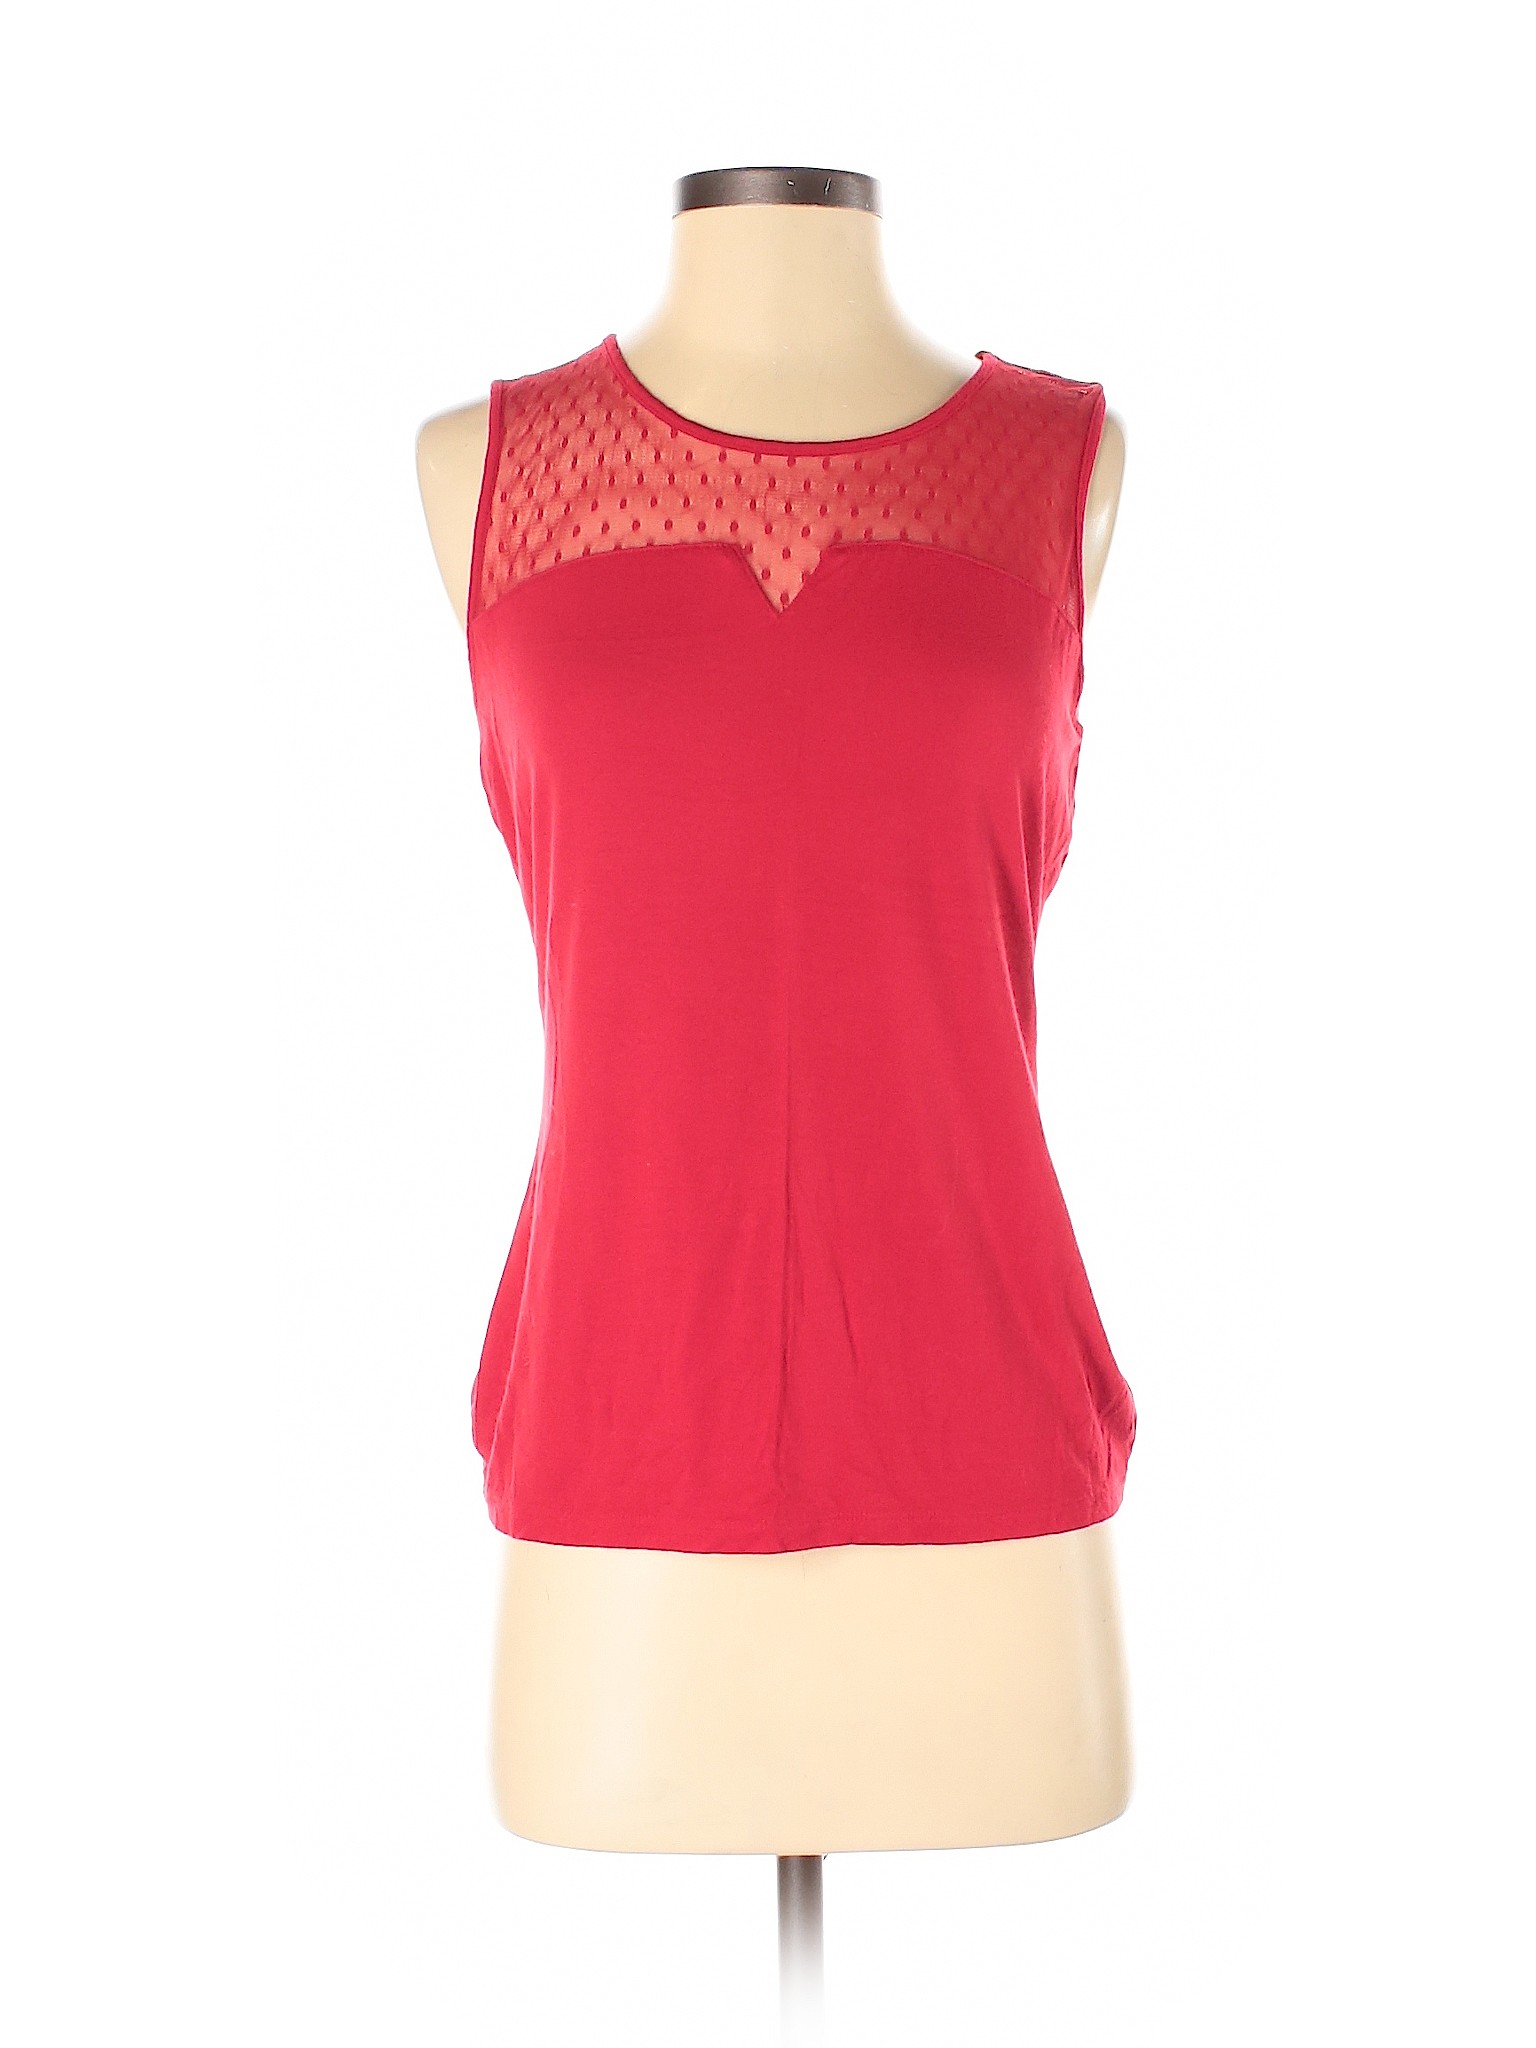 The Limited Women Red Sleeveless Top S | eBay